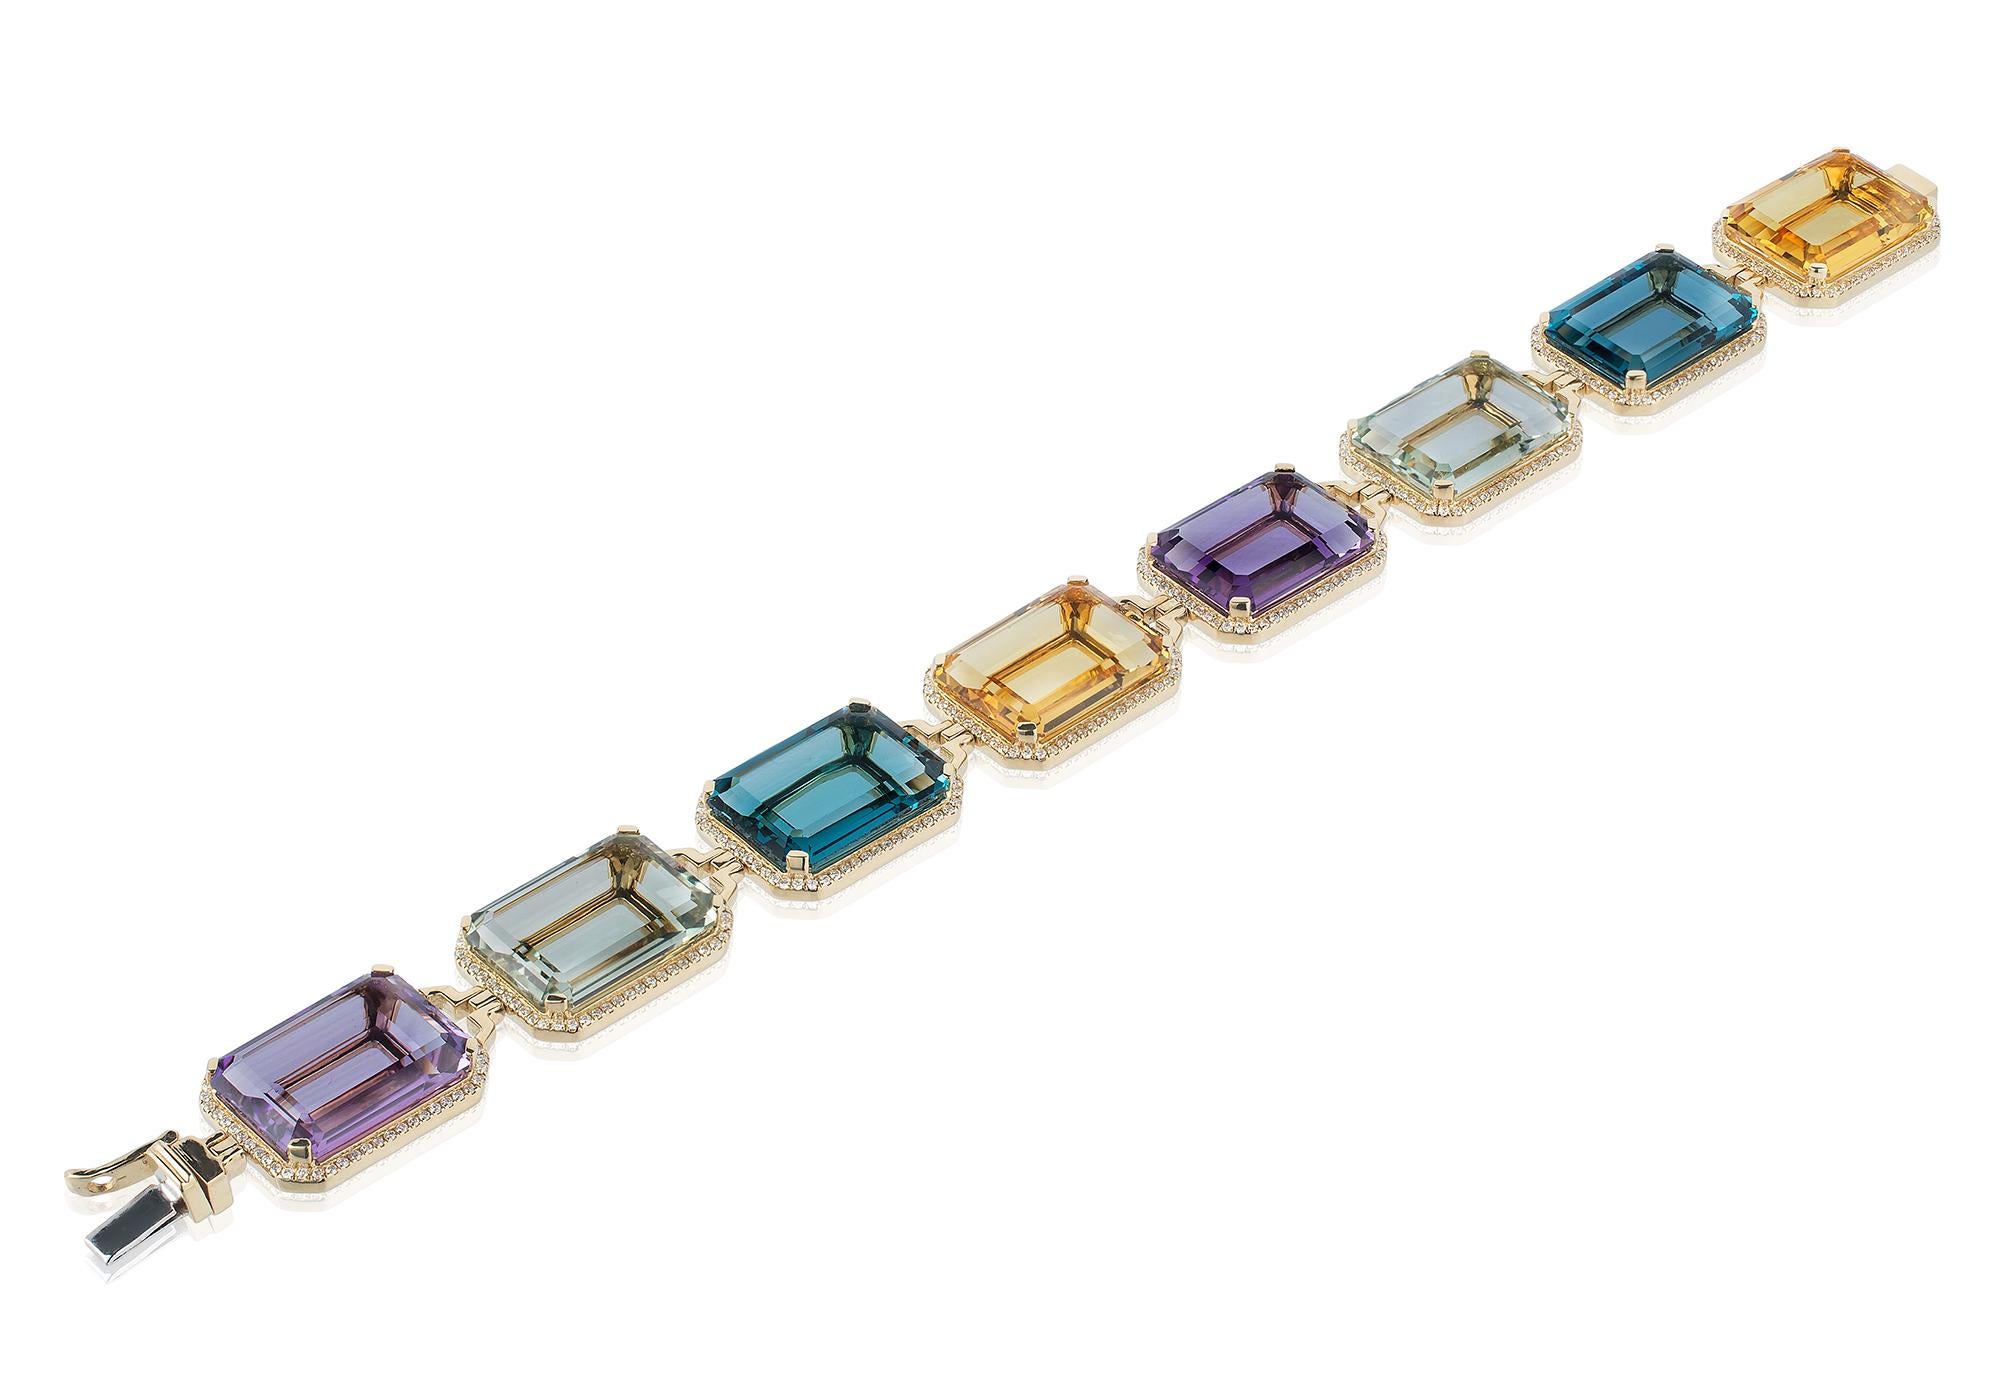 This Amethyst, Prasiolite, London Blue Topaz and Citrine Emerald Cut Bracelet in 18K Yellow Gold with Diamonds is a stunning piece of jewelry from the 'Gossip' Collection. The bracelet features a combination of four different gemstones, each with